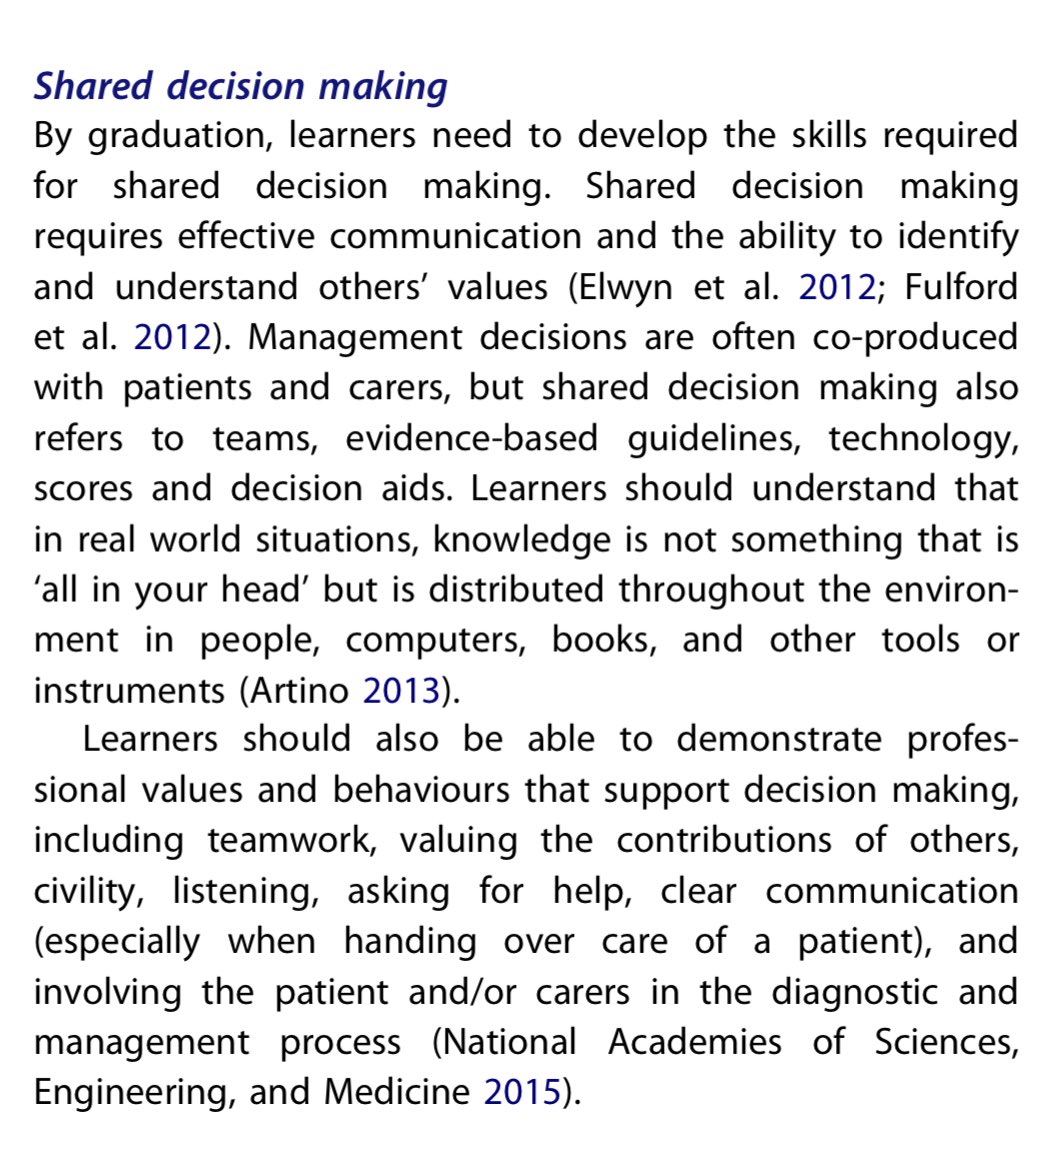 Kicking off #SIDMUtrecht with a talk on shared decision-making, something that is often thought of as between clinician and patient, but it also includes teams, guidelines, technology, and ‘optimal decision-making behaviours’ 👇 (from ⁦@UK_CReME⁩’s consensus statement)